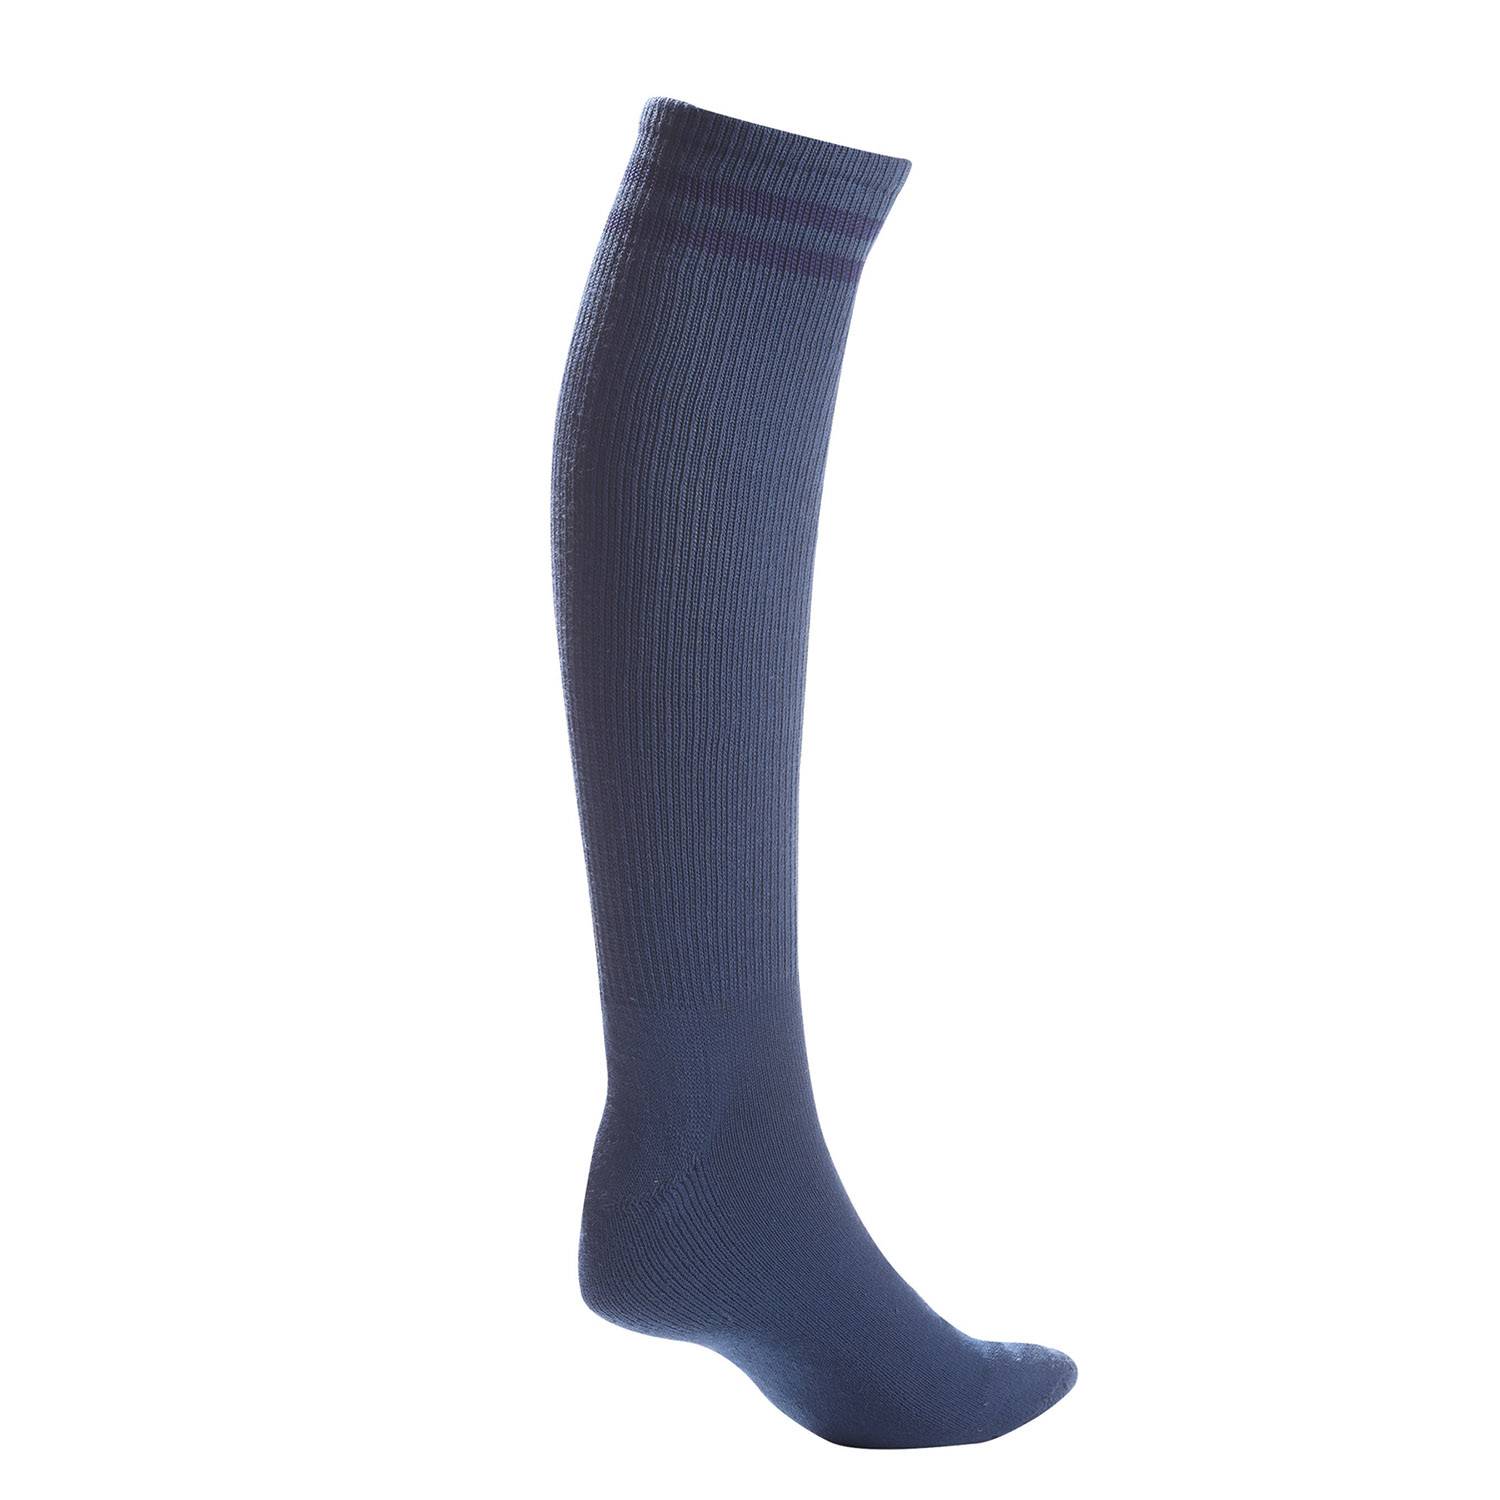 Pro Feet Postal Approved Blue Acrylic Over the Calf Socks (S